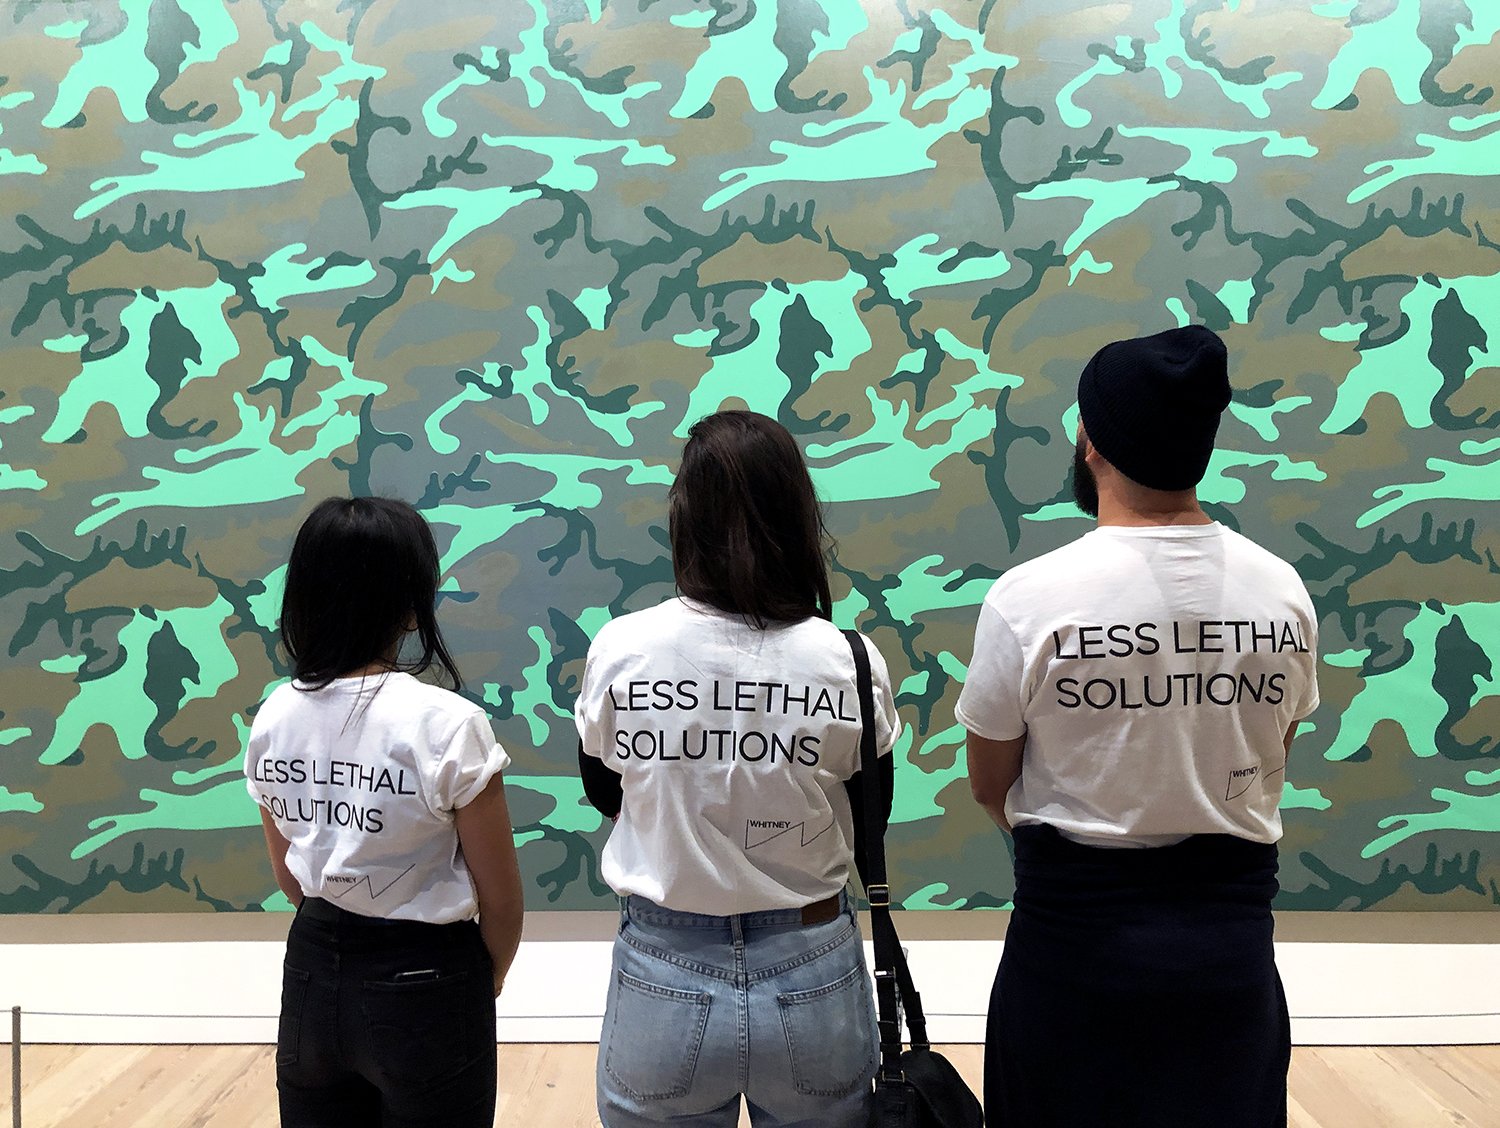   Less Lethal Solutions (Whitney Museum, NY, NY)  site-specific guerilla intervention, custom silkscreened t-shirt, photographic documentation 